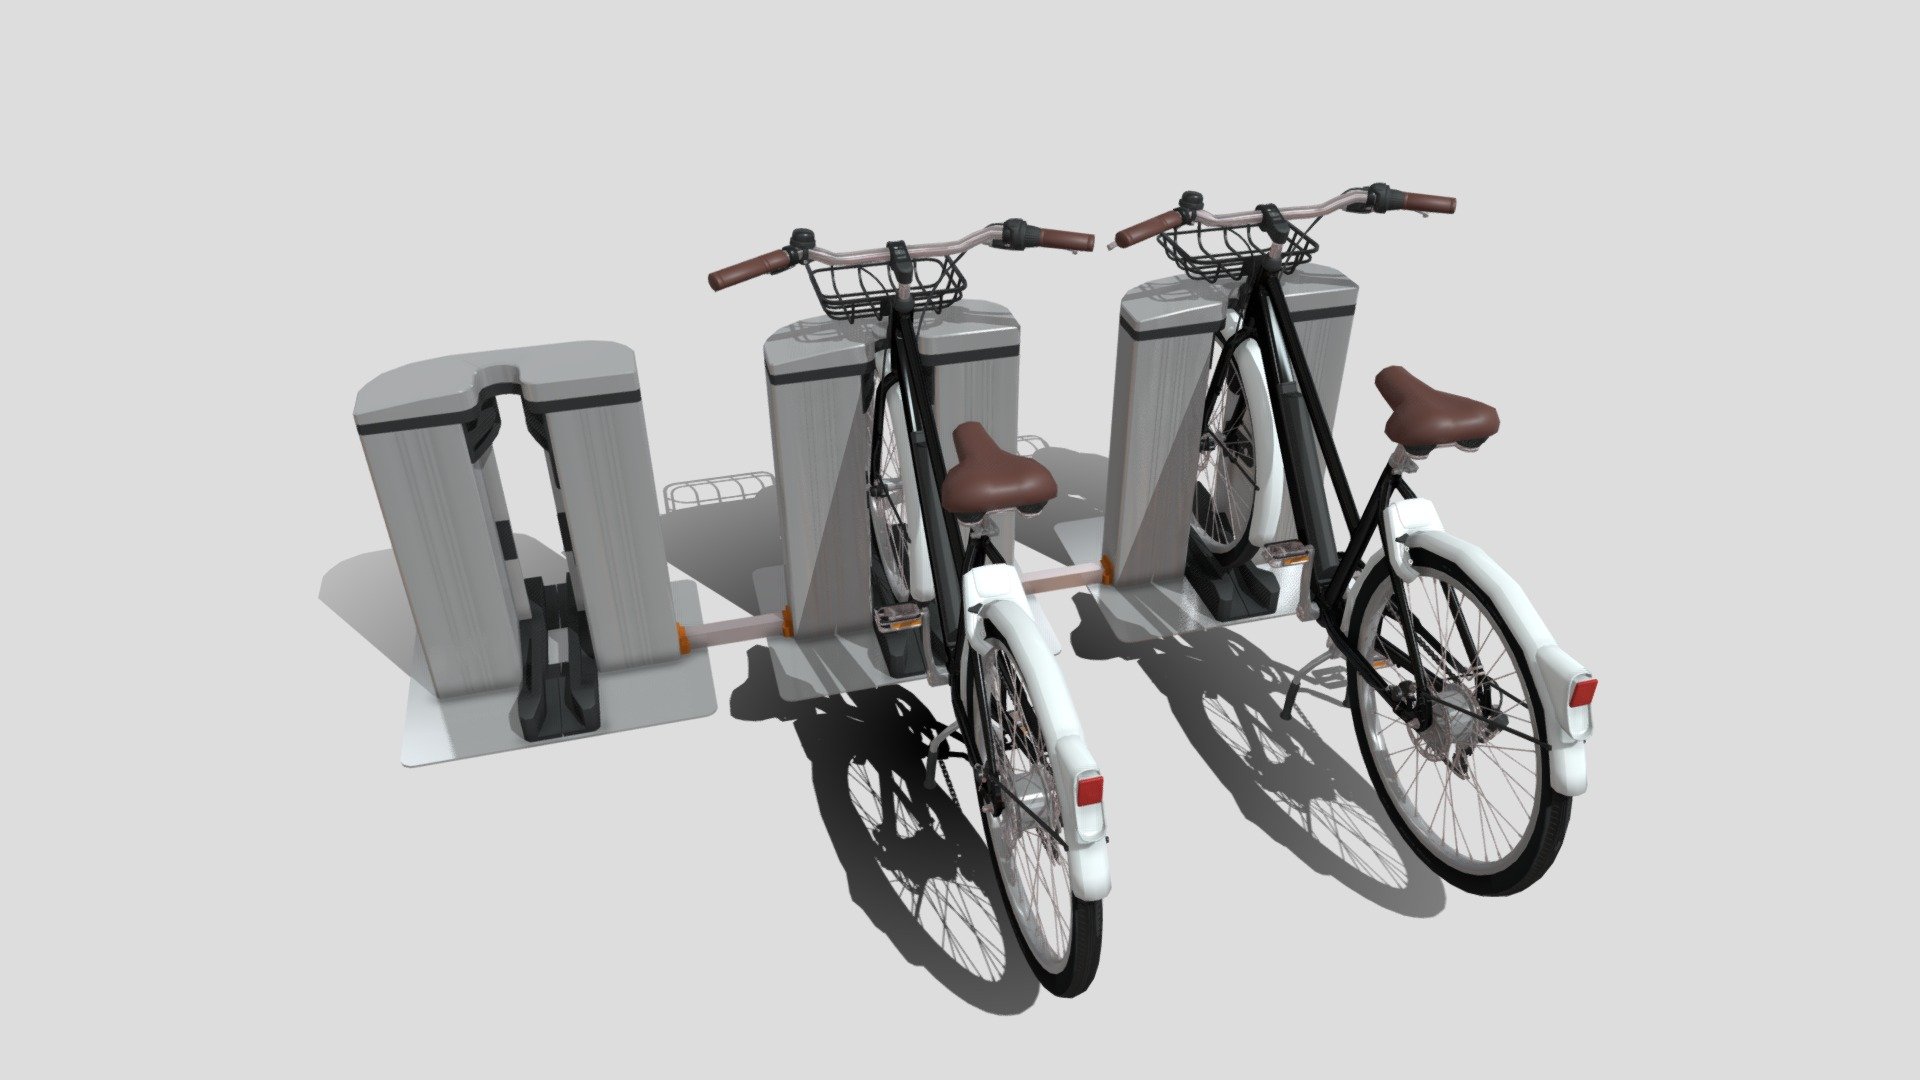 3D model setup consisting of a triple ebike stand, with two electric bikes docked, accurately built.

File formats:
-.blend, rendered with cycles, as seen in the images;
-.obj, with materials applied and textures;
-.dae, with materials applied and textures;
-.fbx, with material slots applied;
-.stl;

3D Software:
This 3d model was originally created in Blender 2.79 and rendered with Cycles.

Materials and textures:
The model has materials applied in all formats, and is ready to import and render .
The model comes with multiple png image textures.

Preview scenes:
The preview images are rendered in Blender using its built-in render engine &lsquo;Cycles'.
Note that the blend files come directly with the rendering scene included and the render command will generate the exact result as seen in previews.

General:
The model is built mostly out of quads, and most elements are subdivisable.

For any problems please feel free to contact me.

Don't forget to rate and enjoy! - Electric Bicycle and Station Black - Buy Royalty Free 3D model by dragosburian 3d model